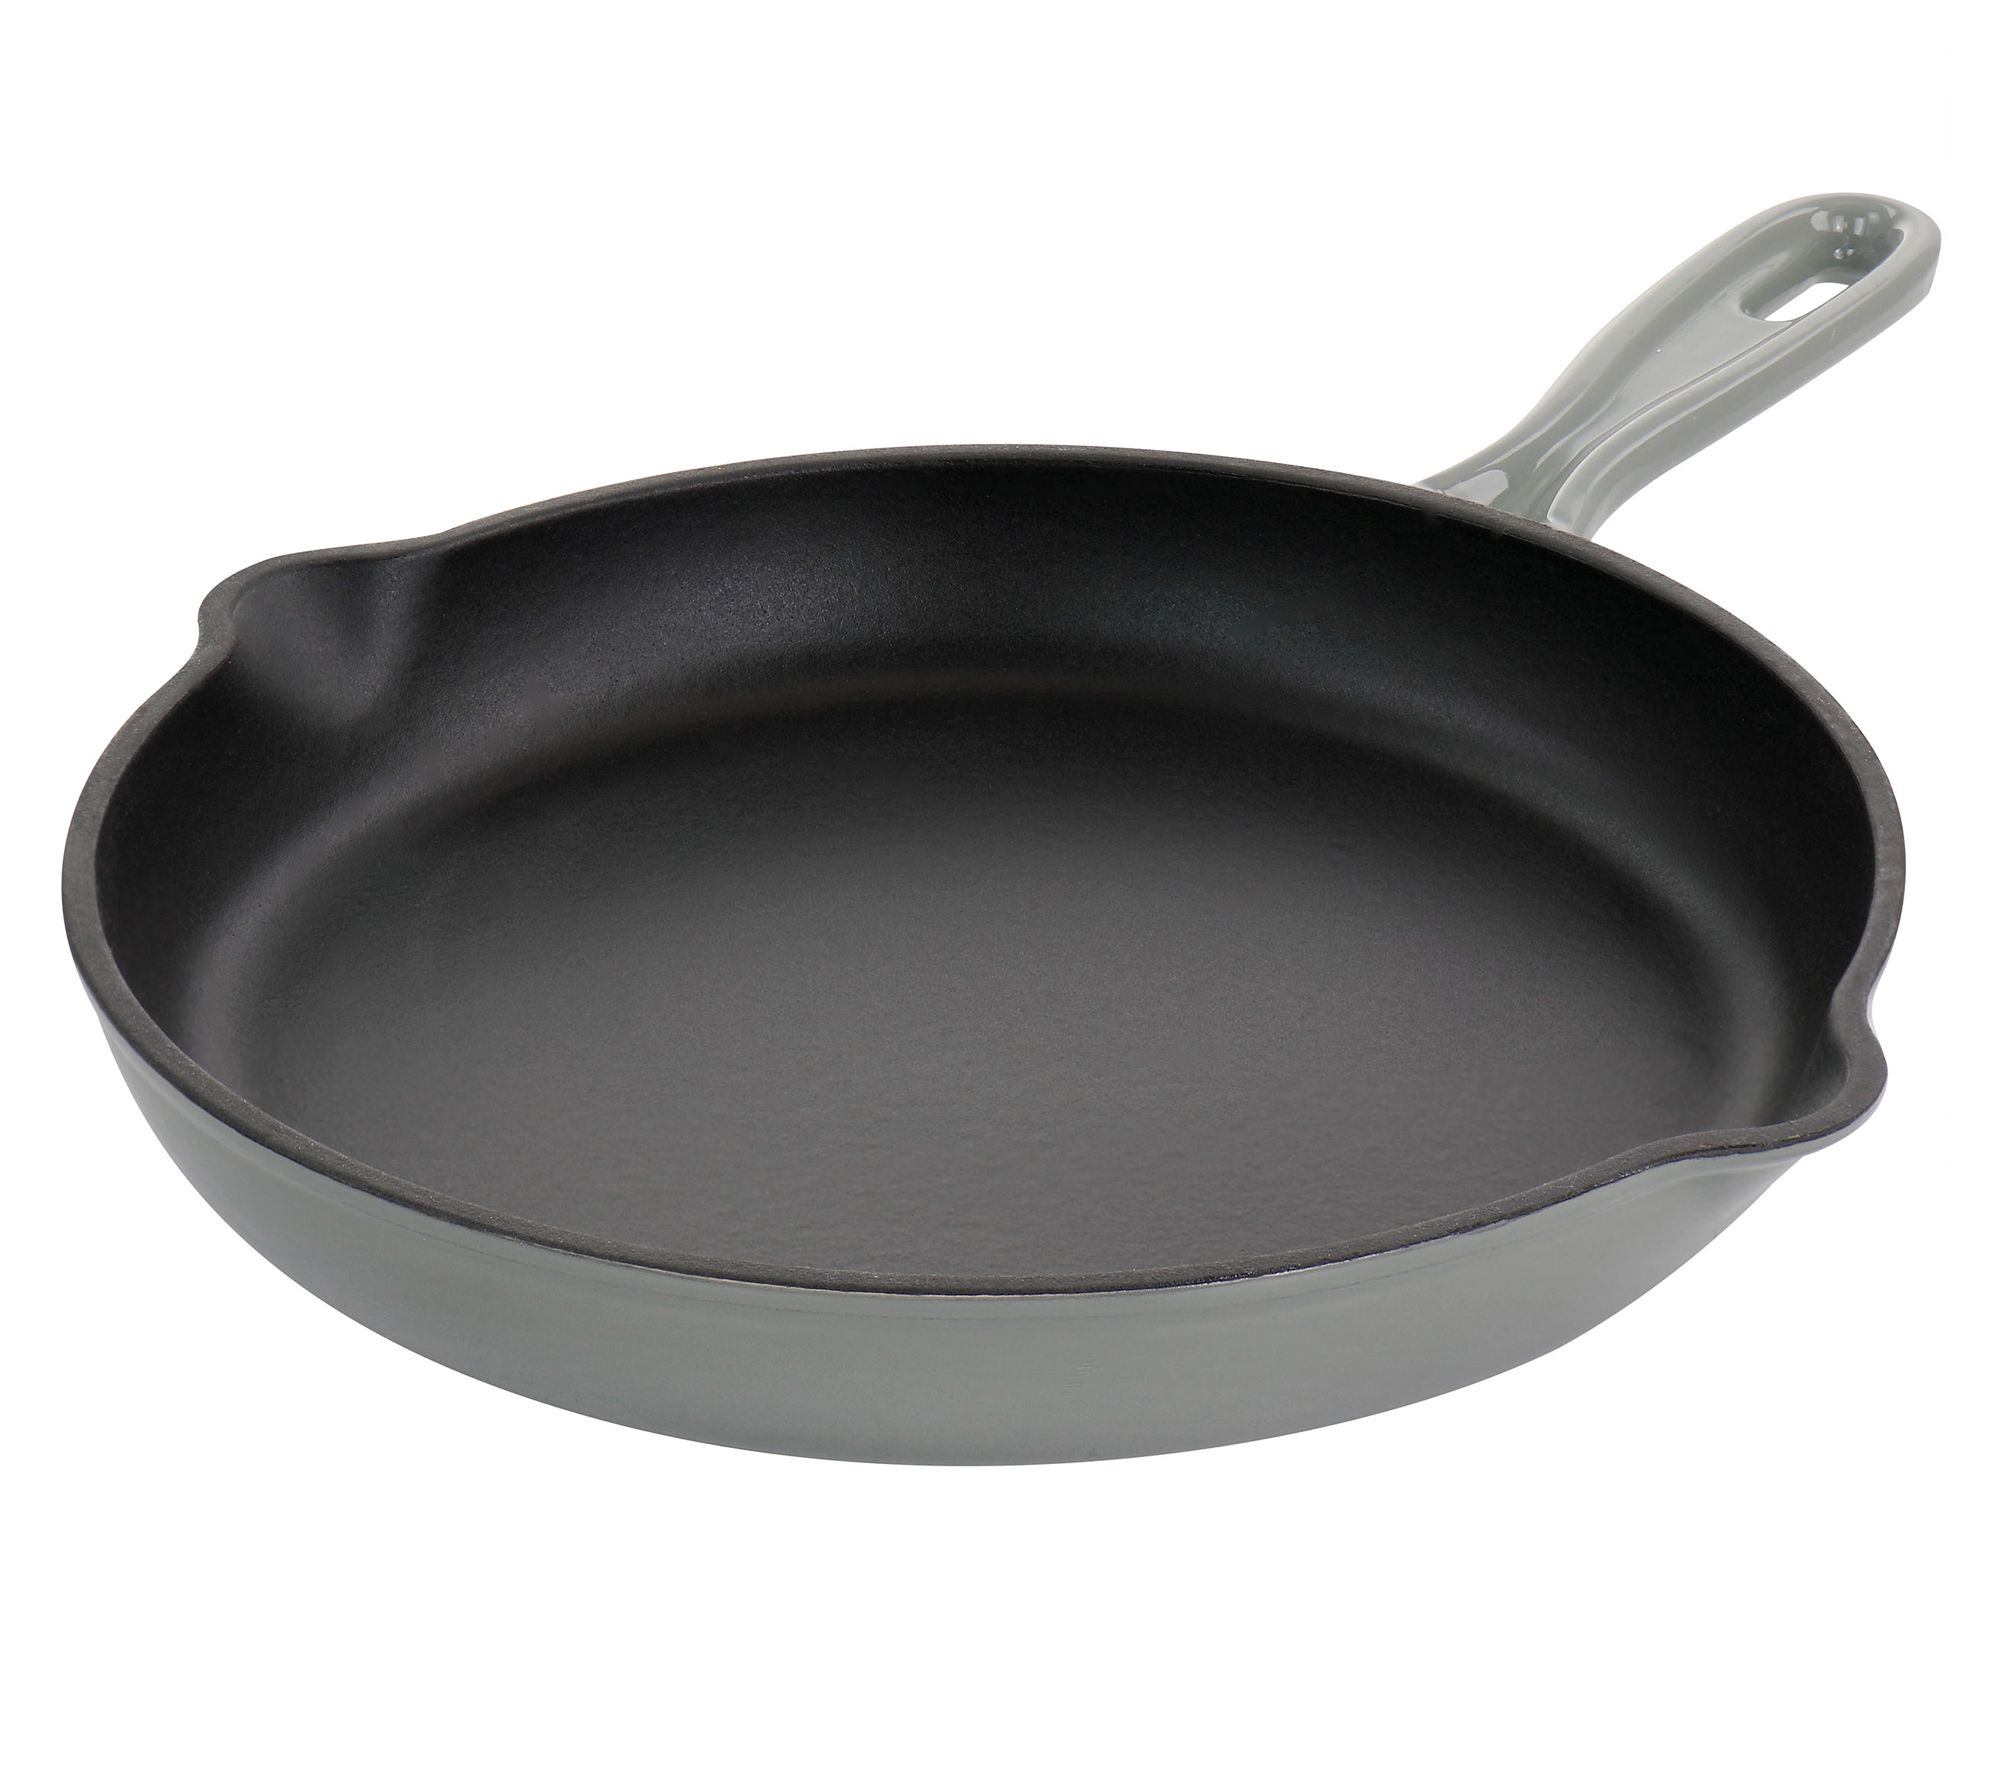 Oster Castaway 12 inch Cast Iron Round Frying Pan with Dual Spouts